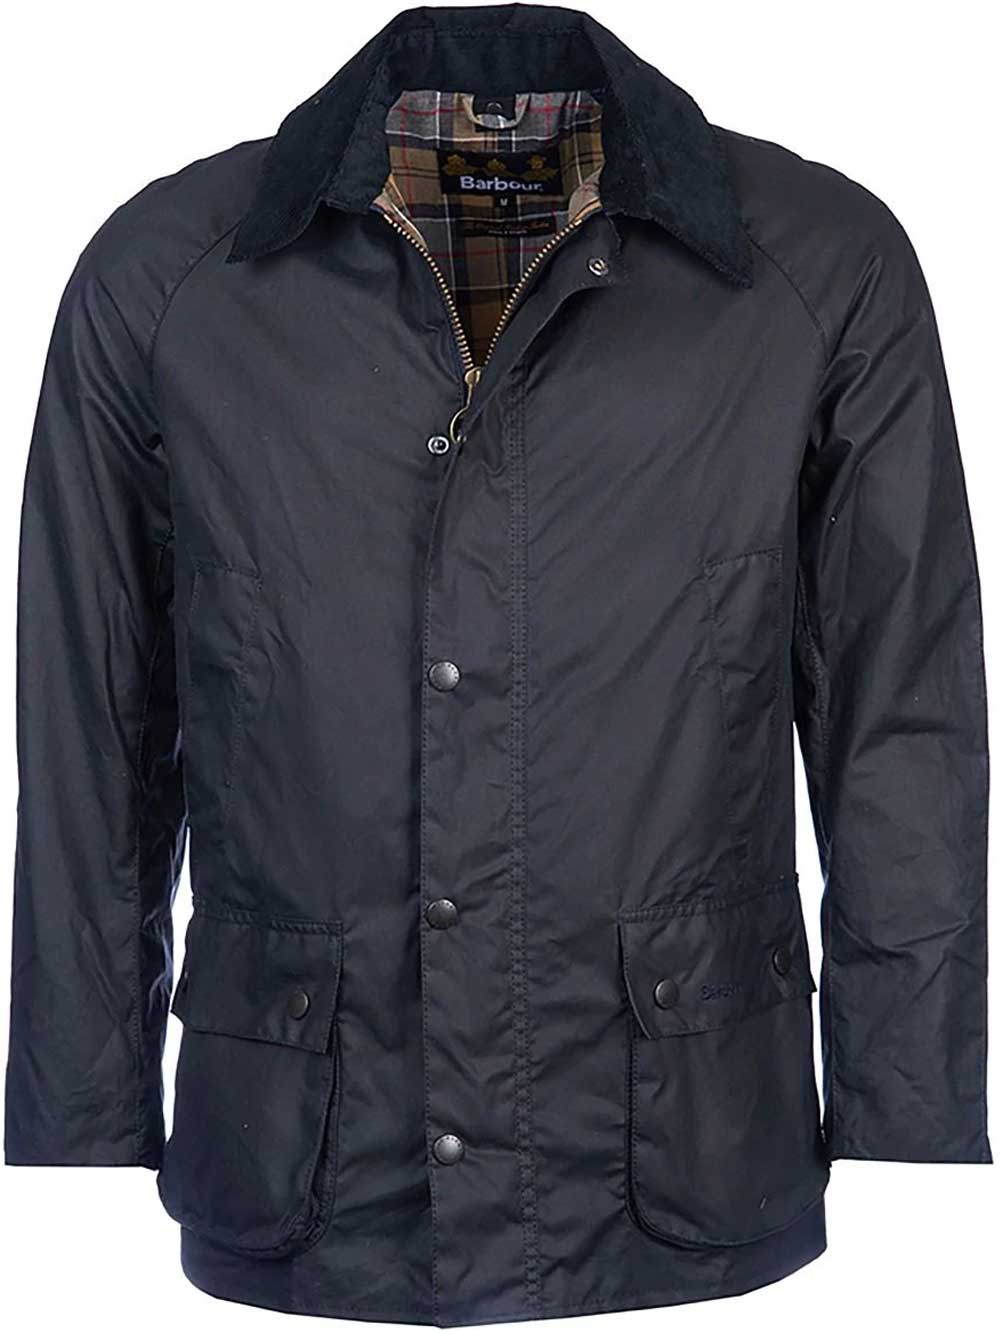 BARBOUR Ashby Wax Jacket - Mens - Navy